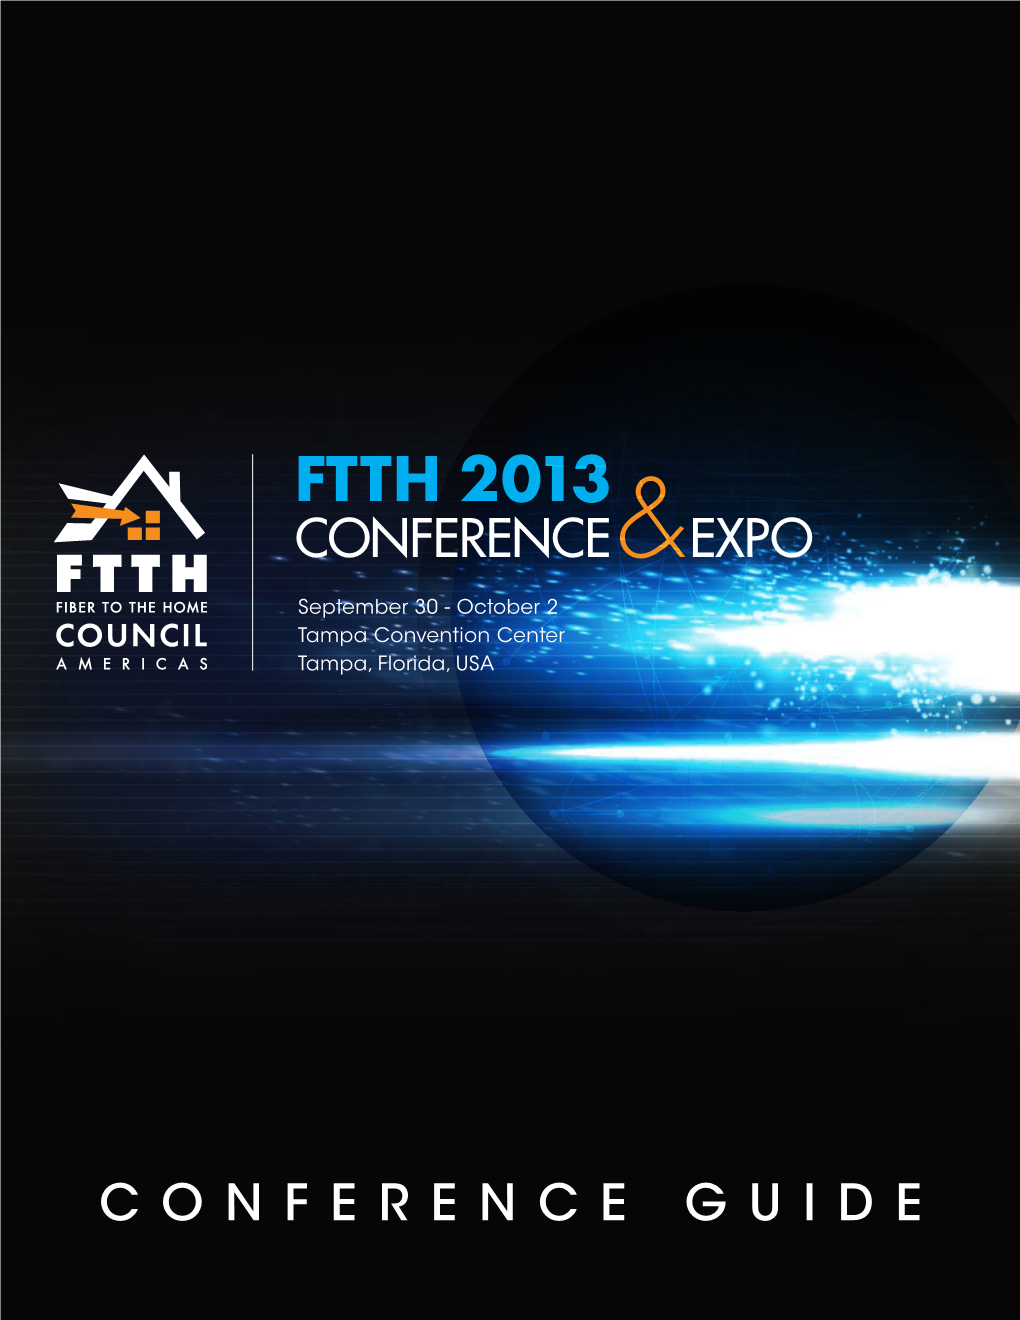 FTTH 2013 Conference & Expo